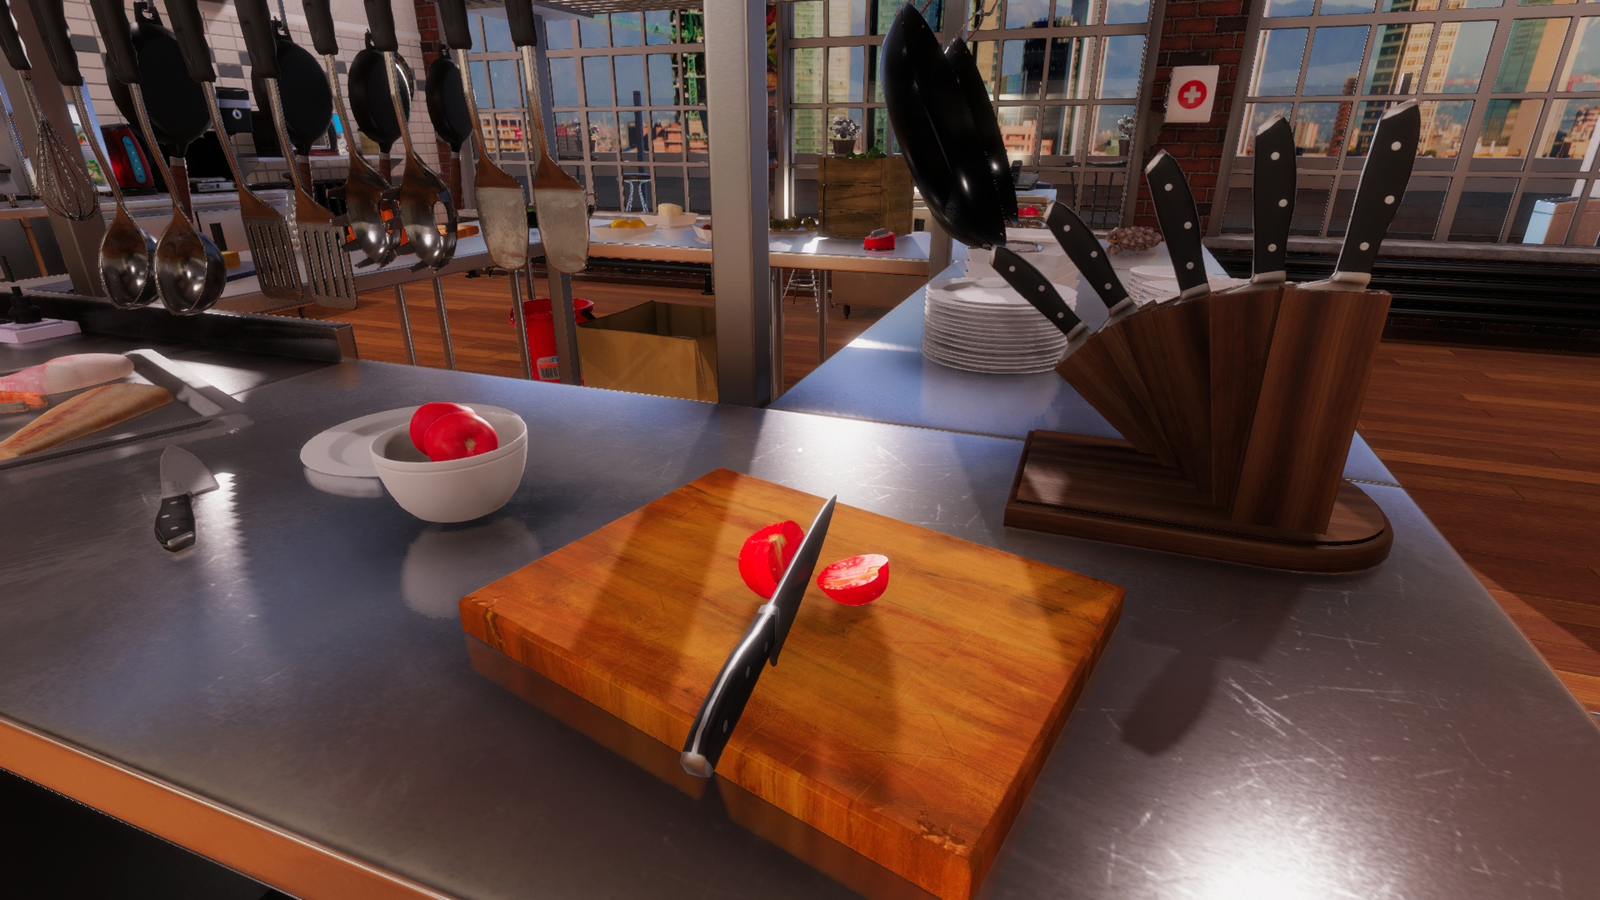 Microsoft reportedly paid $600k to put Cooking Simulator on Game